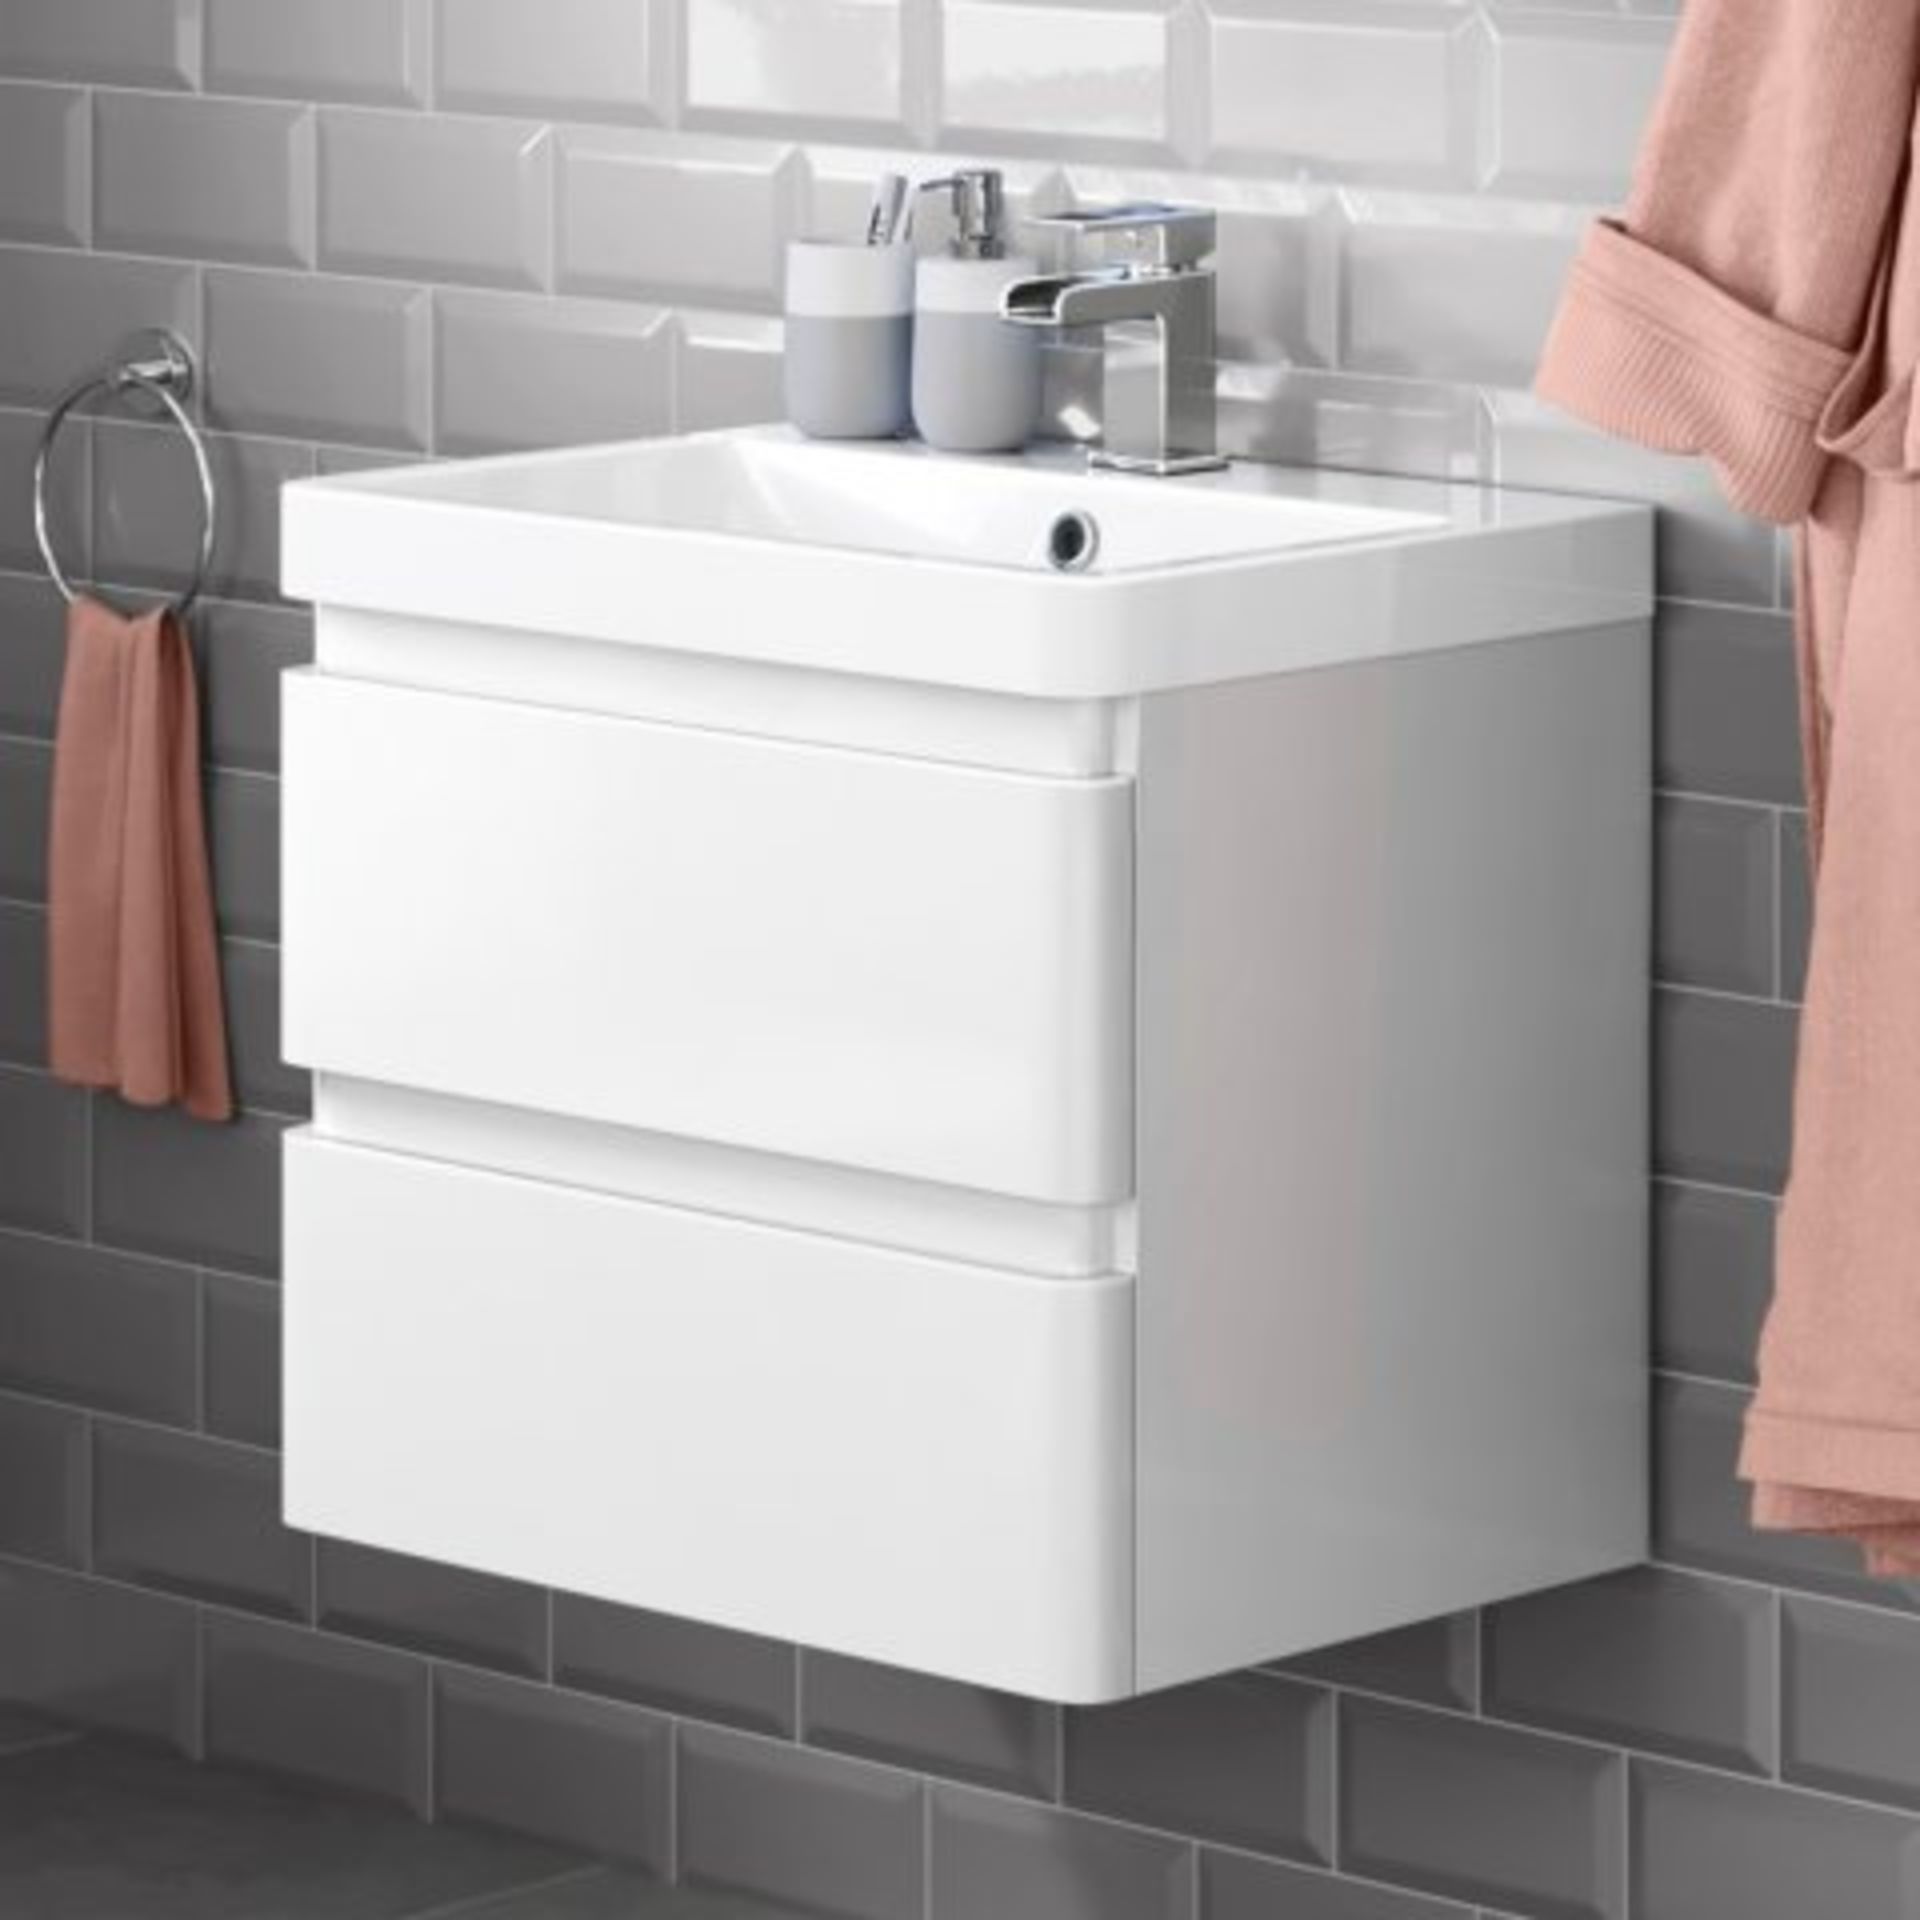 (H3) 600mm Denver II Gloss White Built In Basin Drawer Unit - Wall Hung. RRP £599.99. COMES COMPLETE